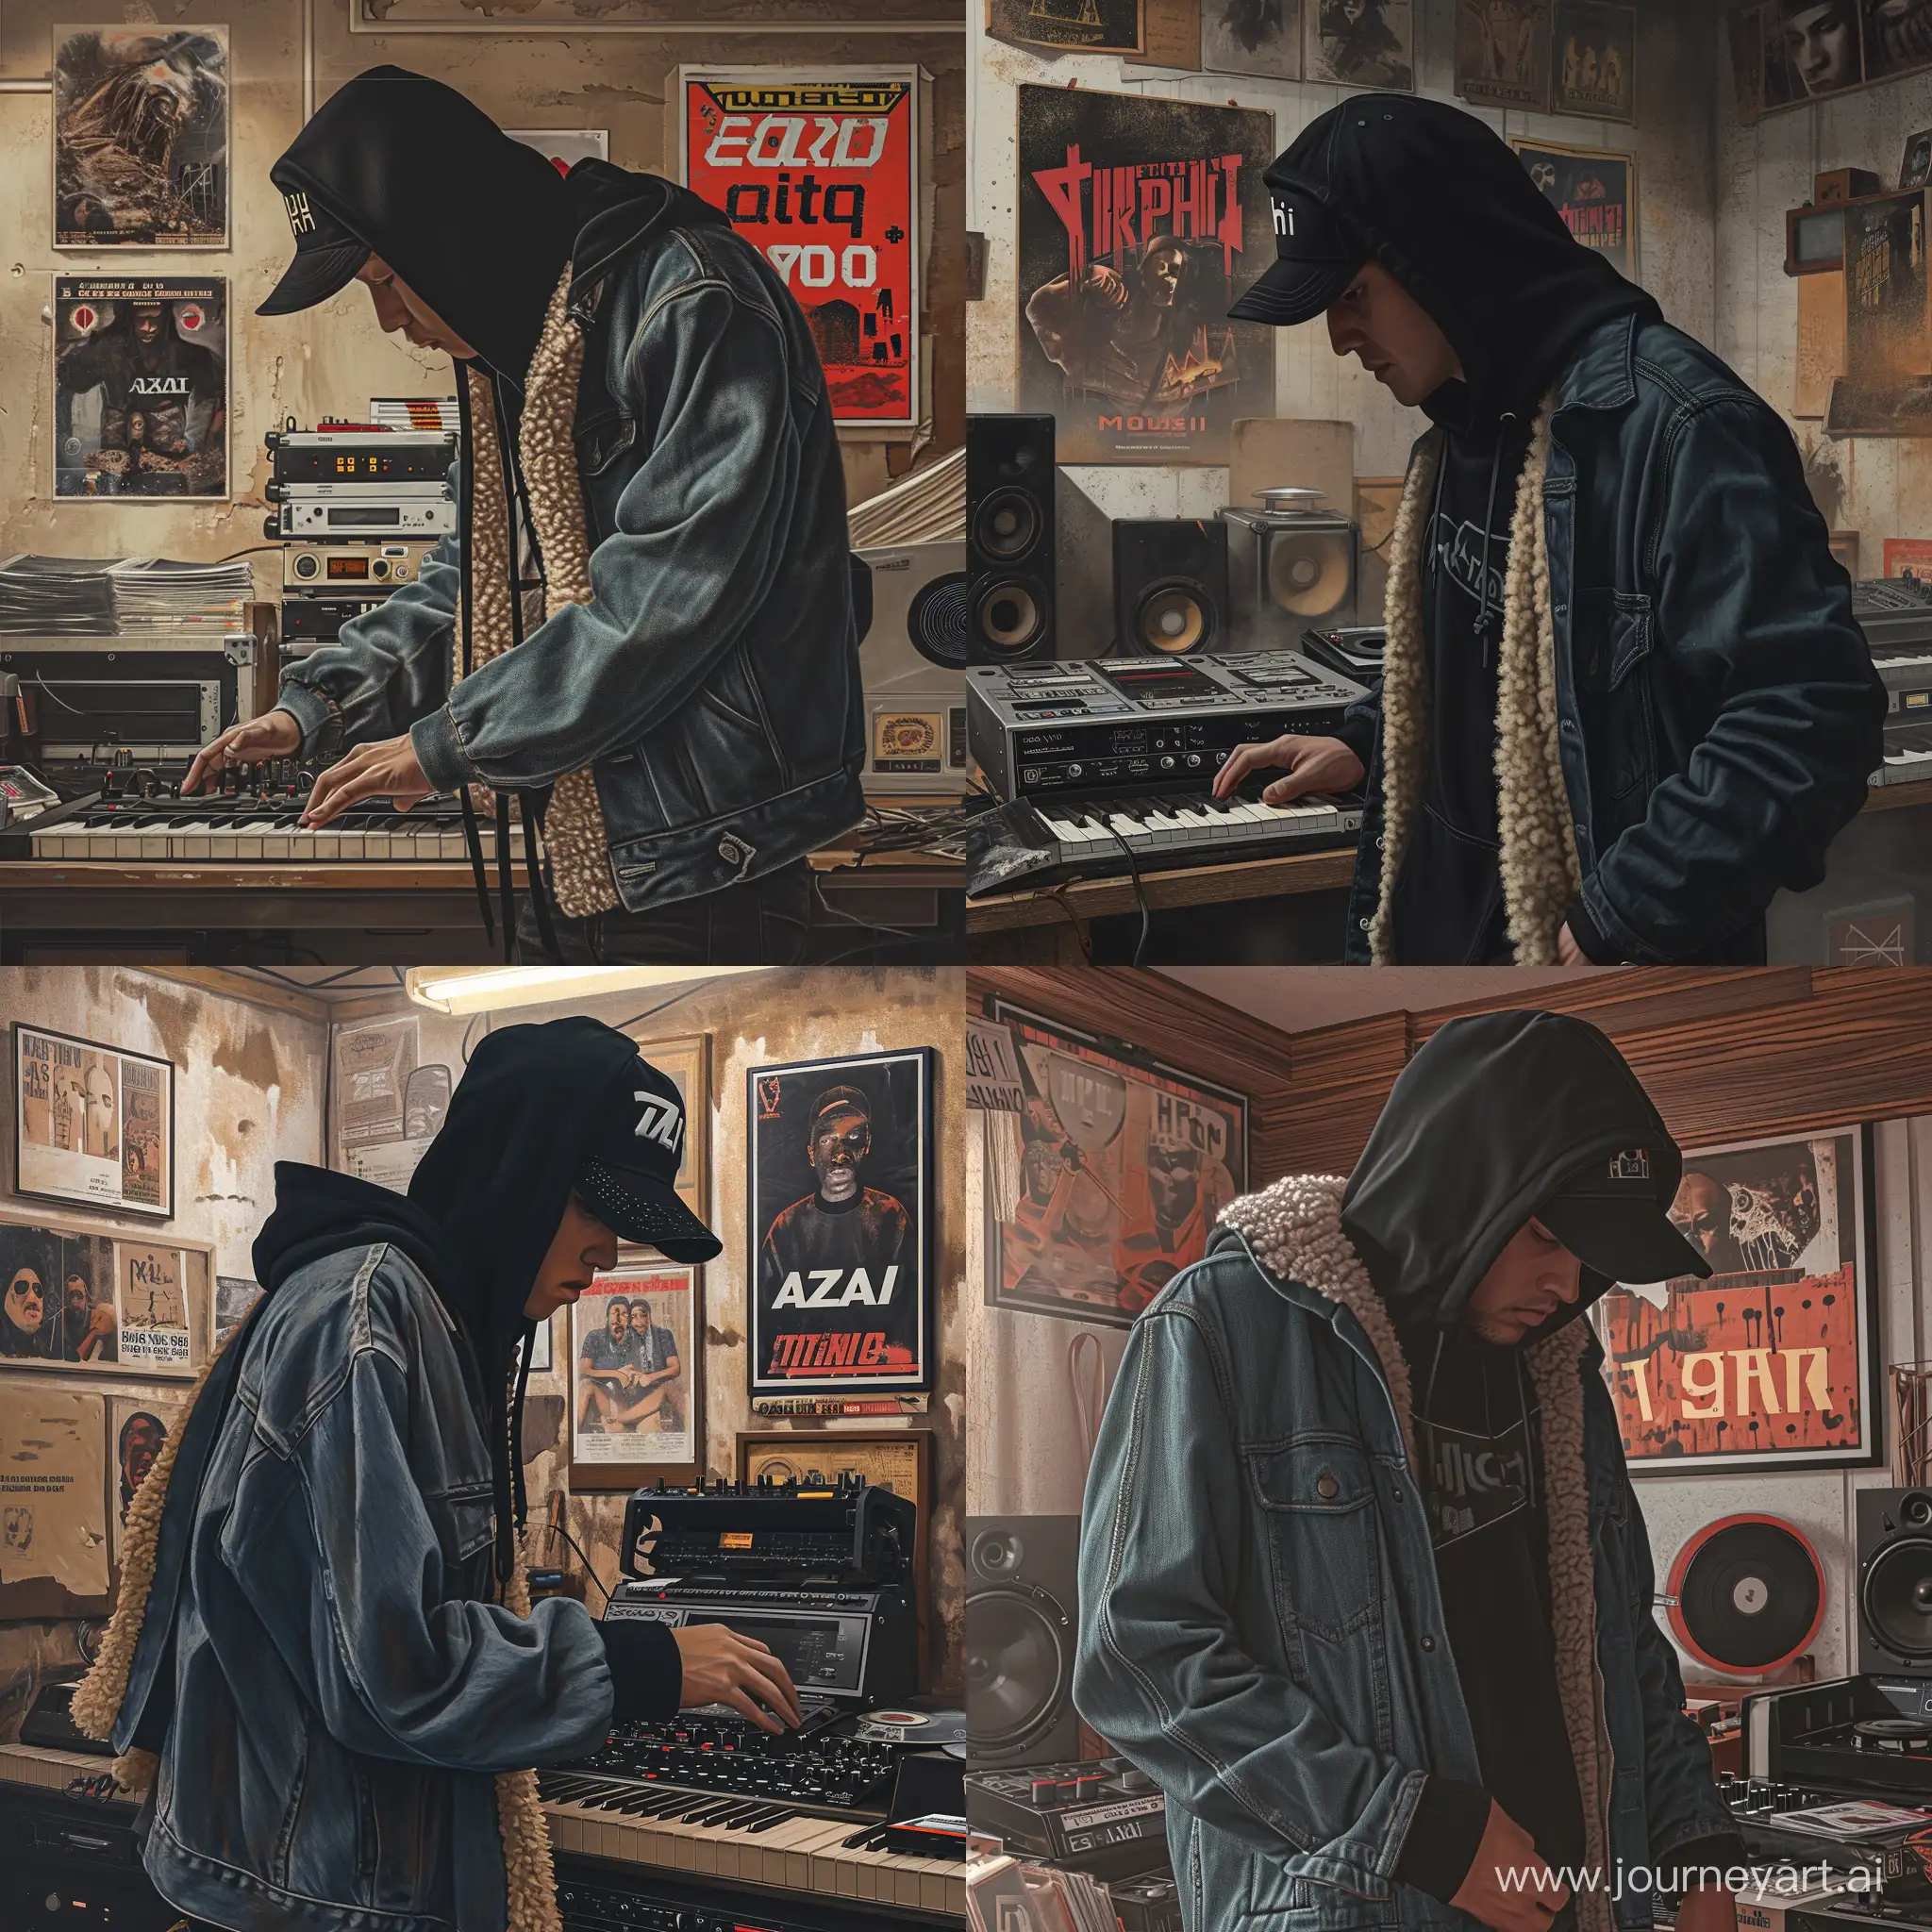 "Frame by frame. Style: Hyperrealism. Character: A man in a black hoodie (hood not worn on the head), black snapback cap, denim 'trucker' style jacket lined with sheep's wool. Environment: A dusty music studio in a basement, featuring akai music equipment and vinyl records and old horror movies posters on the wall. Action: The character is either creating music or listening to a recording on a cassette. Lighting and colors: Natural lighting suggesting cloudy skies, with a focus on earthy and neutral denim shades. Perspective and composition: Adhering to the golden ratio, focusing on the character and their interaction with the music equipment. Negative Prompt: No neon colors, other characters, unrelated objects, bright colors, elements of fantasy or surrealism. Additional information: To be used as a hip-hop album cover, capturing an atmosphere of concentration and passion for music. Tags: #hiphop, #musicproduction, #akai, #studio, #mixtape. Notes: Emphasis on the details of the clothing and authenticity of the music equipment.